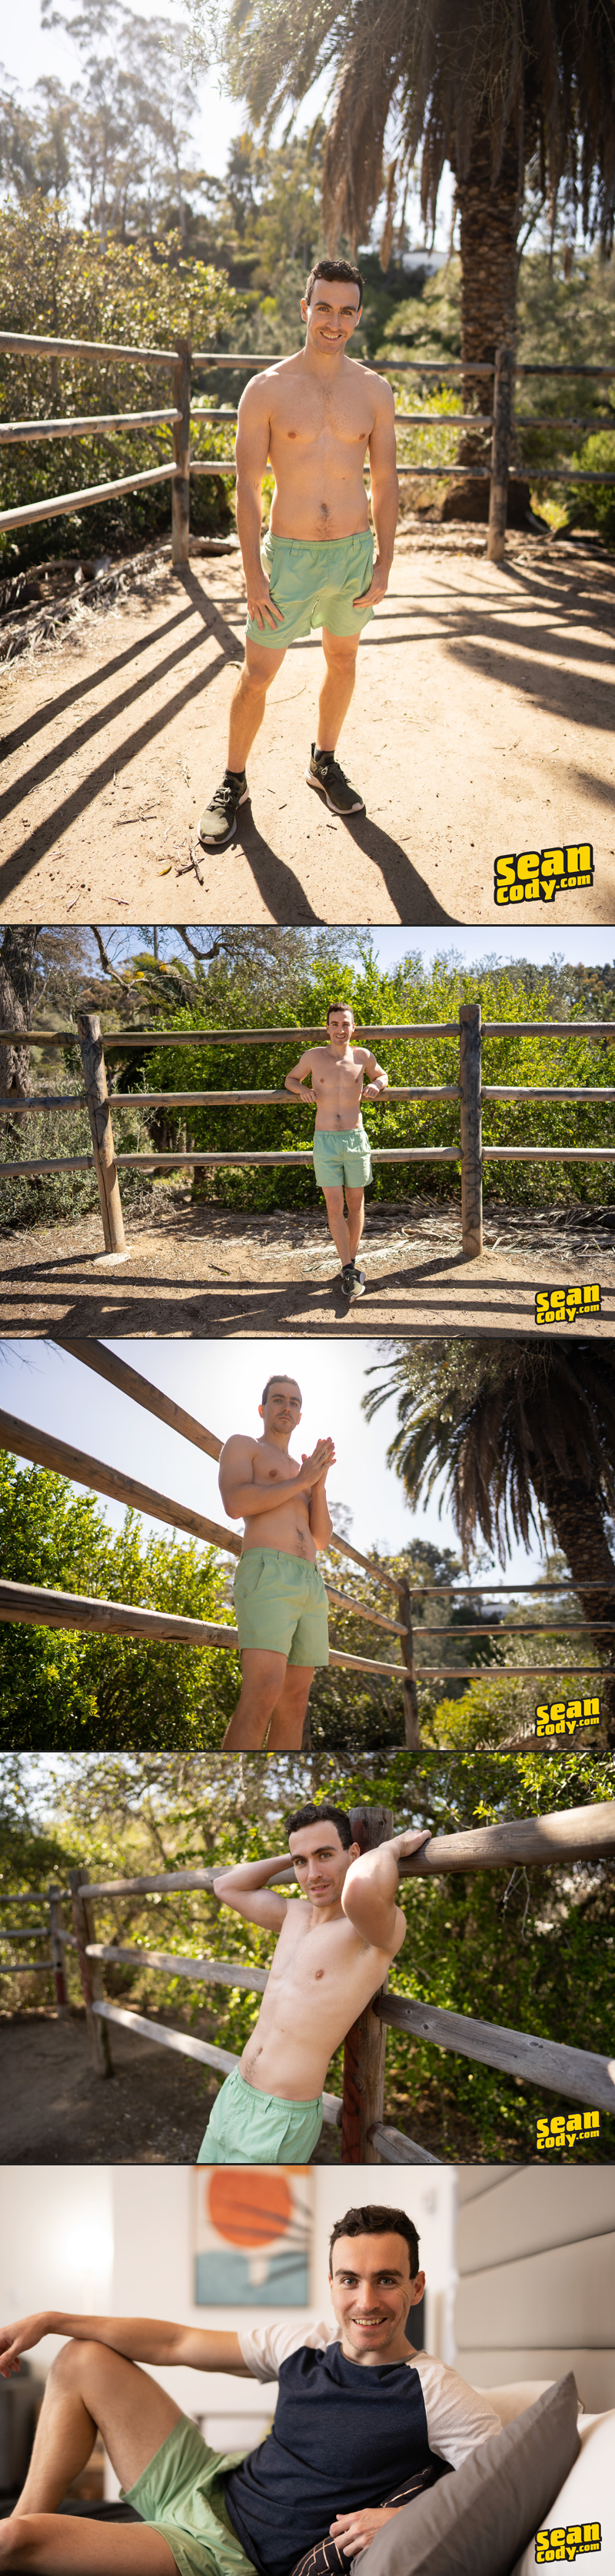 Newcomer JOHNNY's Introductory Solo at SeanCody